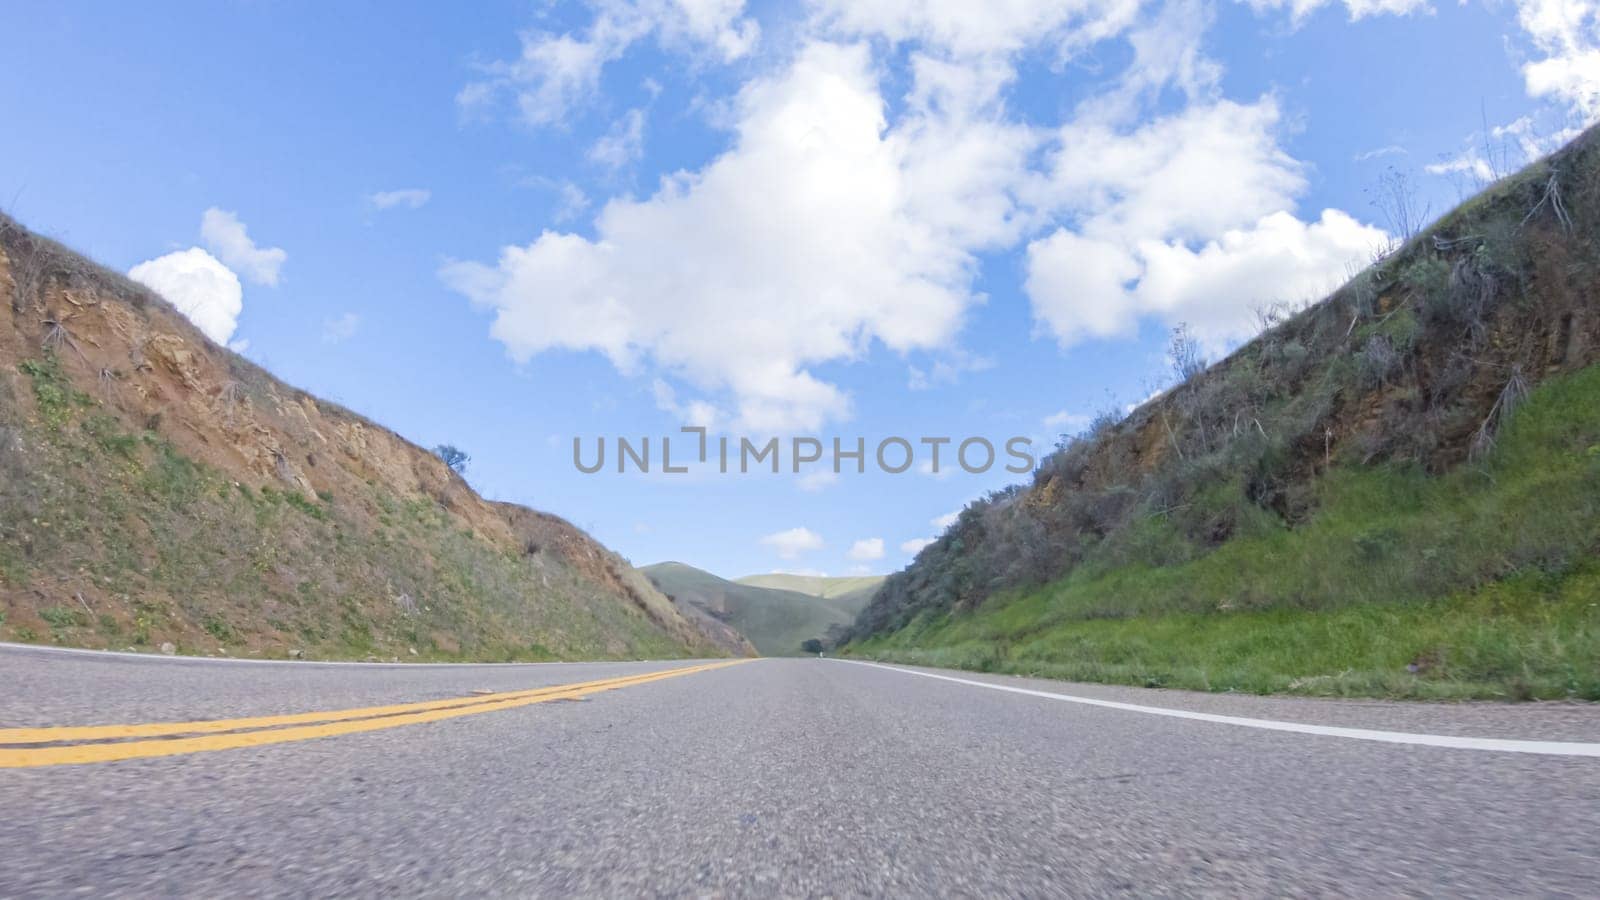 On a clear winter day, a car smoothly travels along Highway 101 near Santa Maria, California, under a brilliant blue sky, surrounded by a blend of greenery and golden hues.